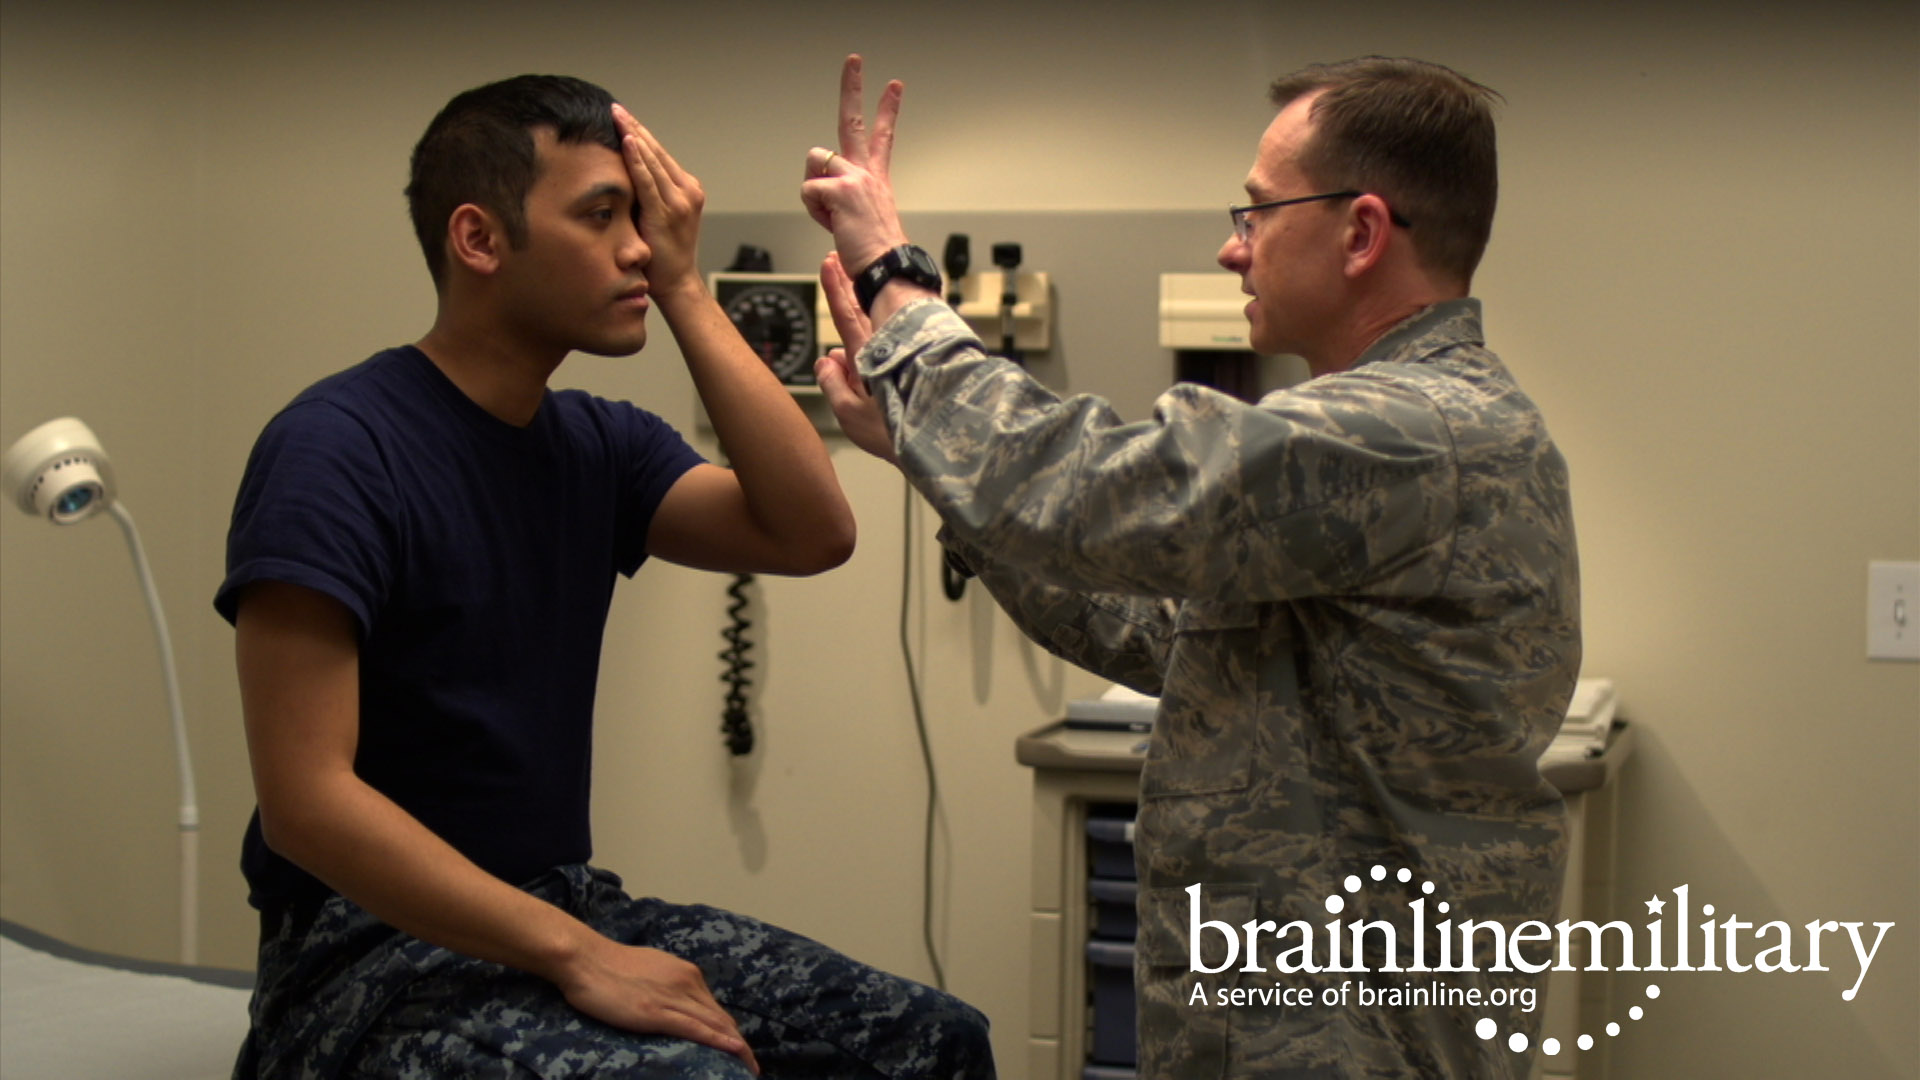 BrainLineMilitary.org captures footage of Dr. Jeff Lewis carrying out a neurological exam.